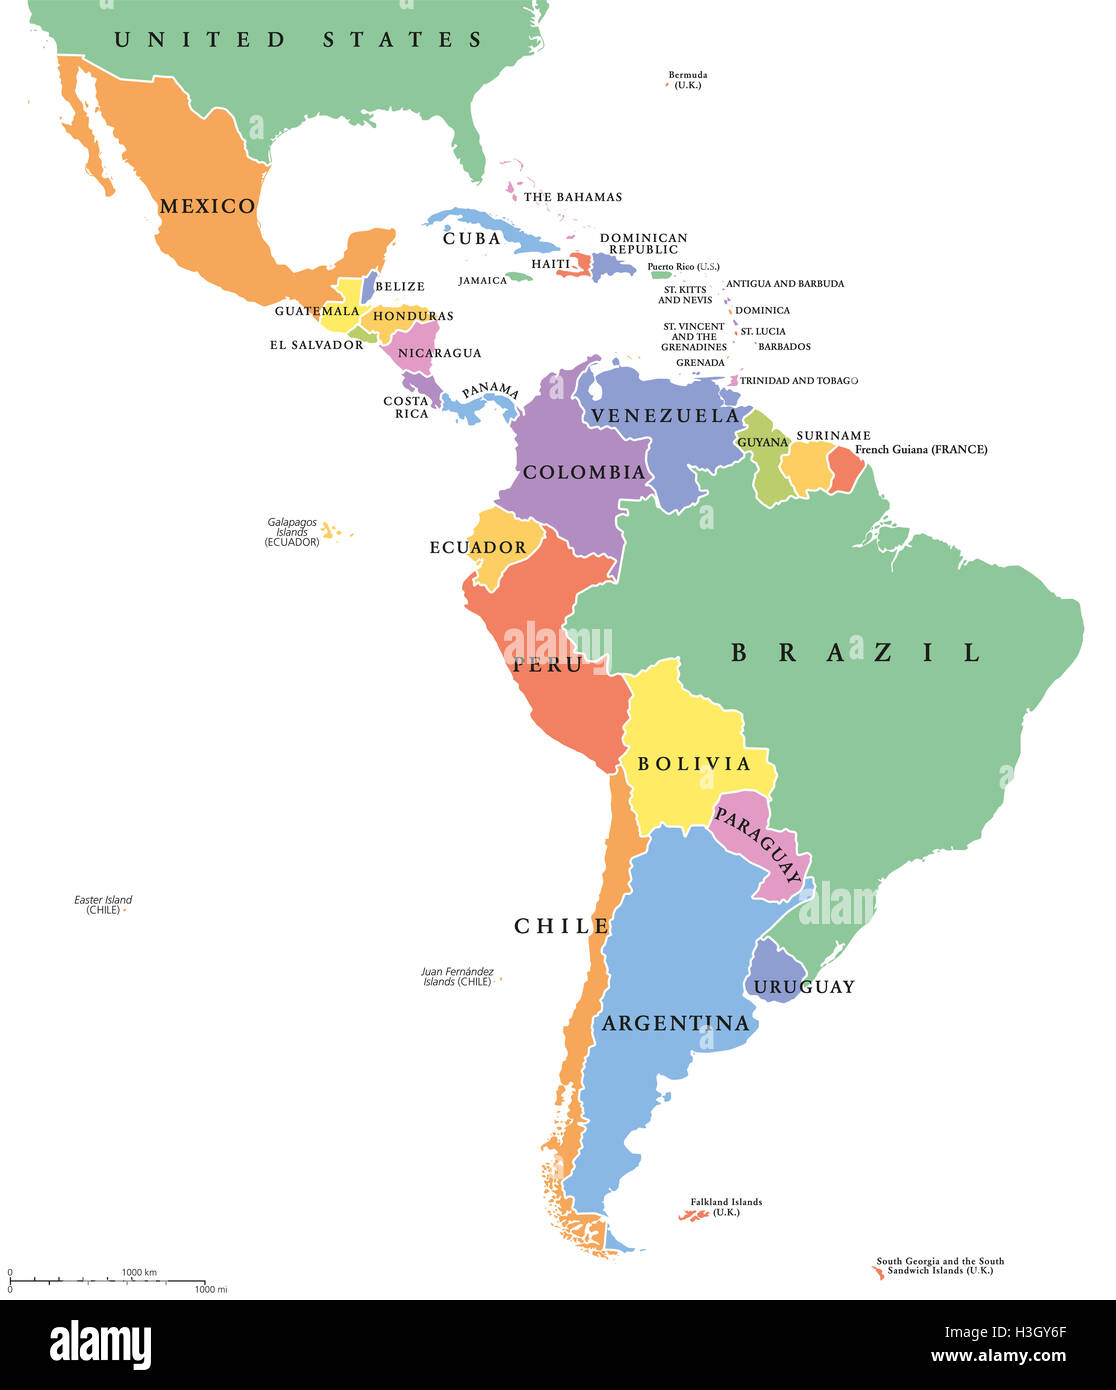 Latin America single states political map. Countries in different colors, with national borders and English country names. Stock Photo